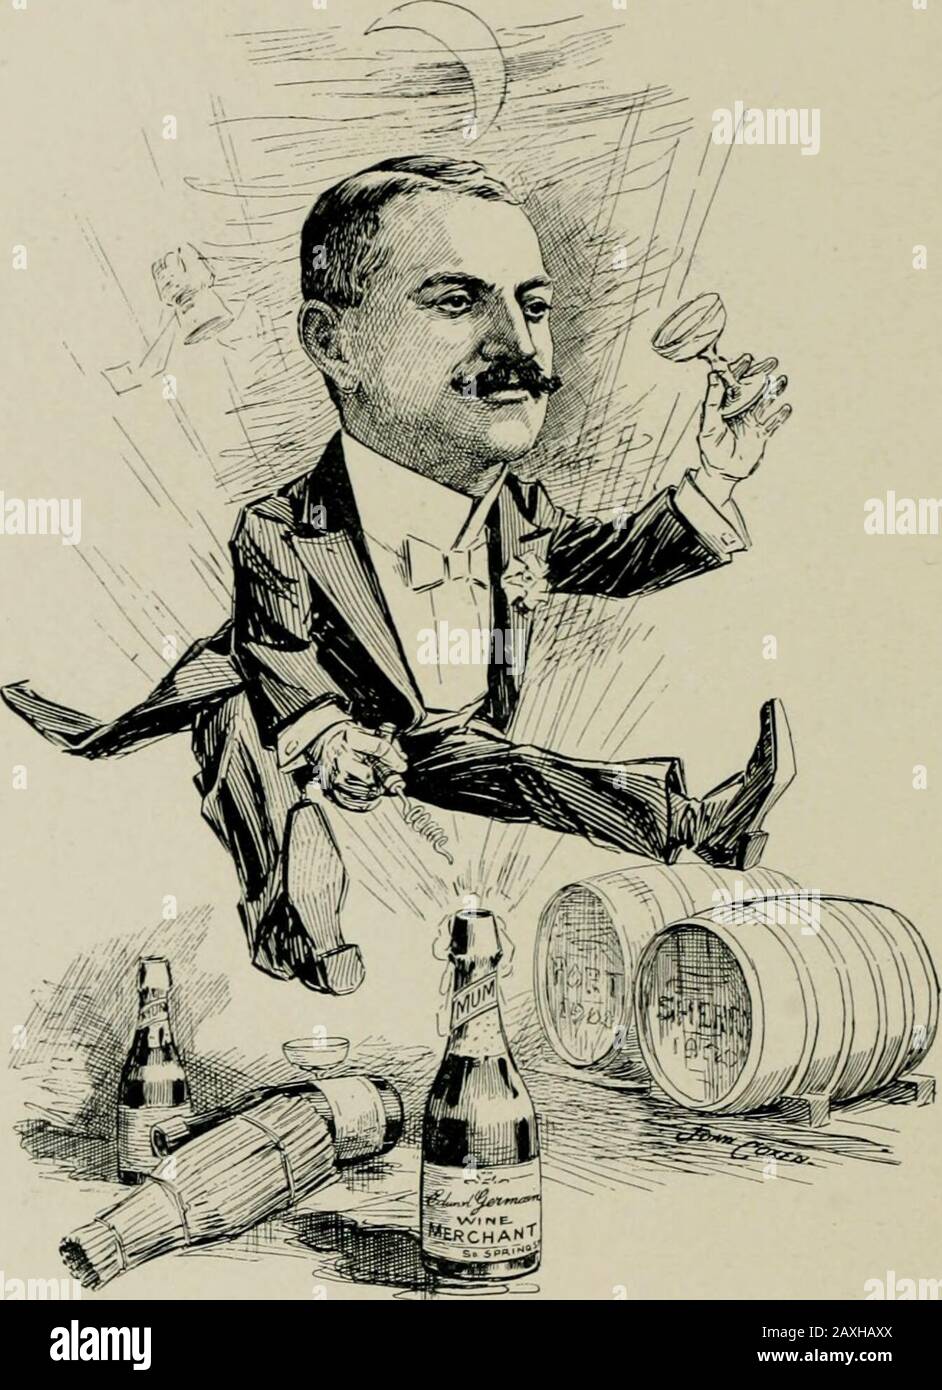 'As we see 'em,' a volume of cartoons and caricatures of Los Angeles citizens . V. S. GARRETT,Architect.. EDWARD GERMAIN,President Edward Germain Wine Co. Stock Photo